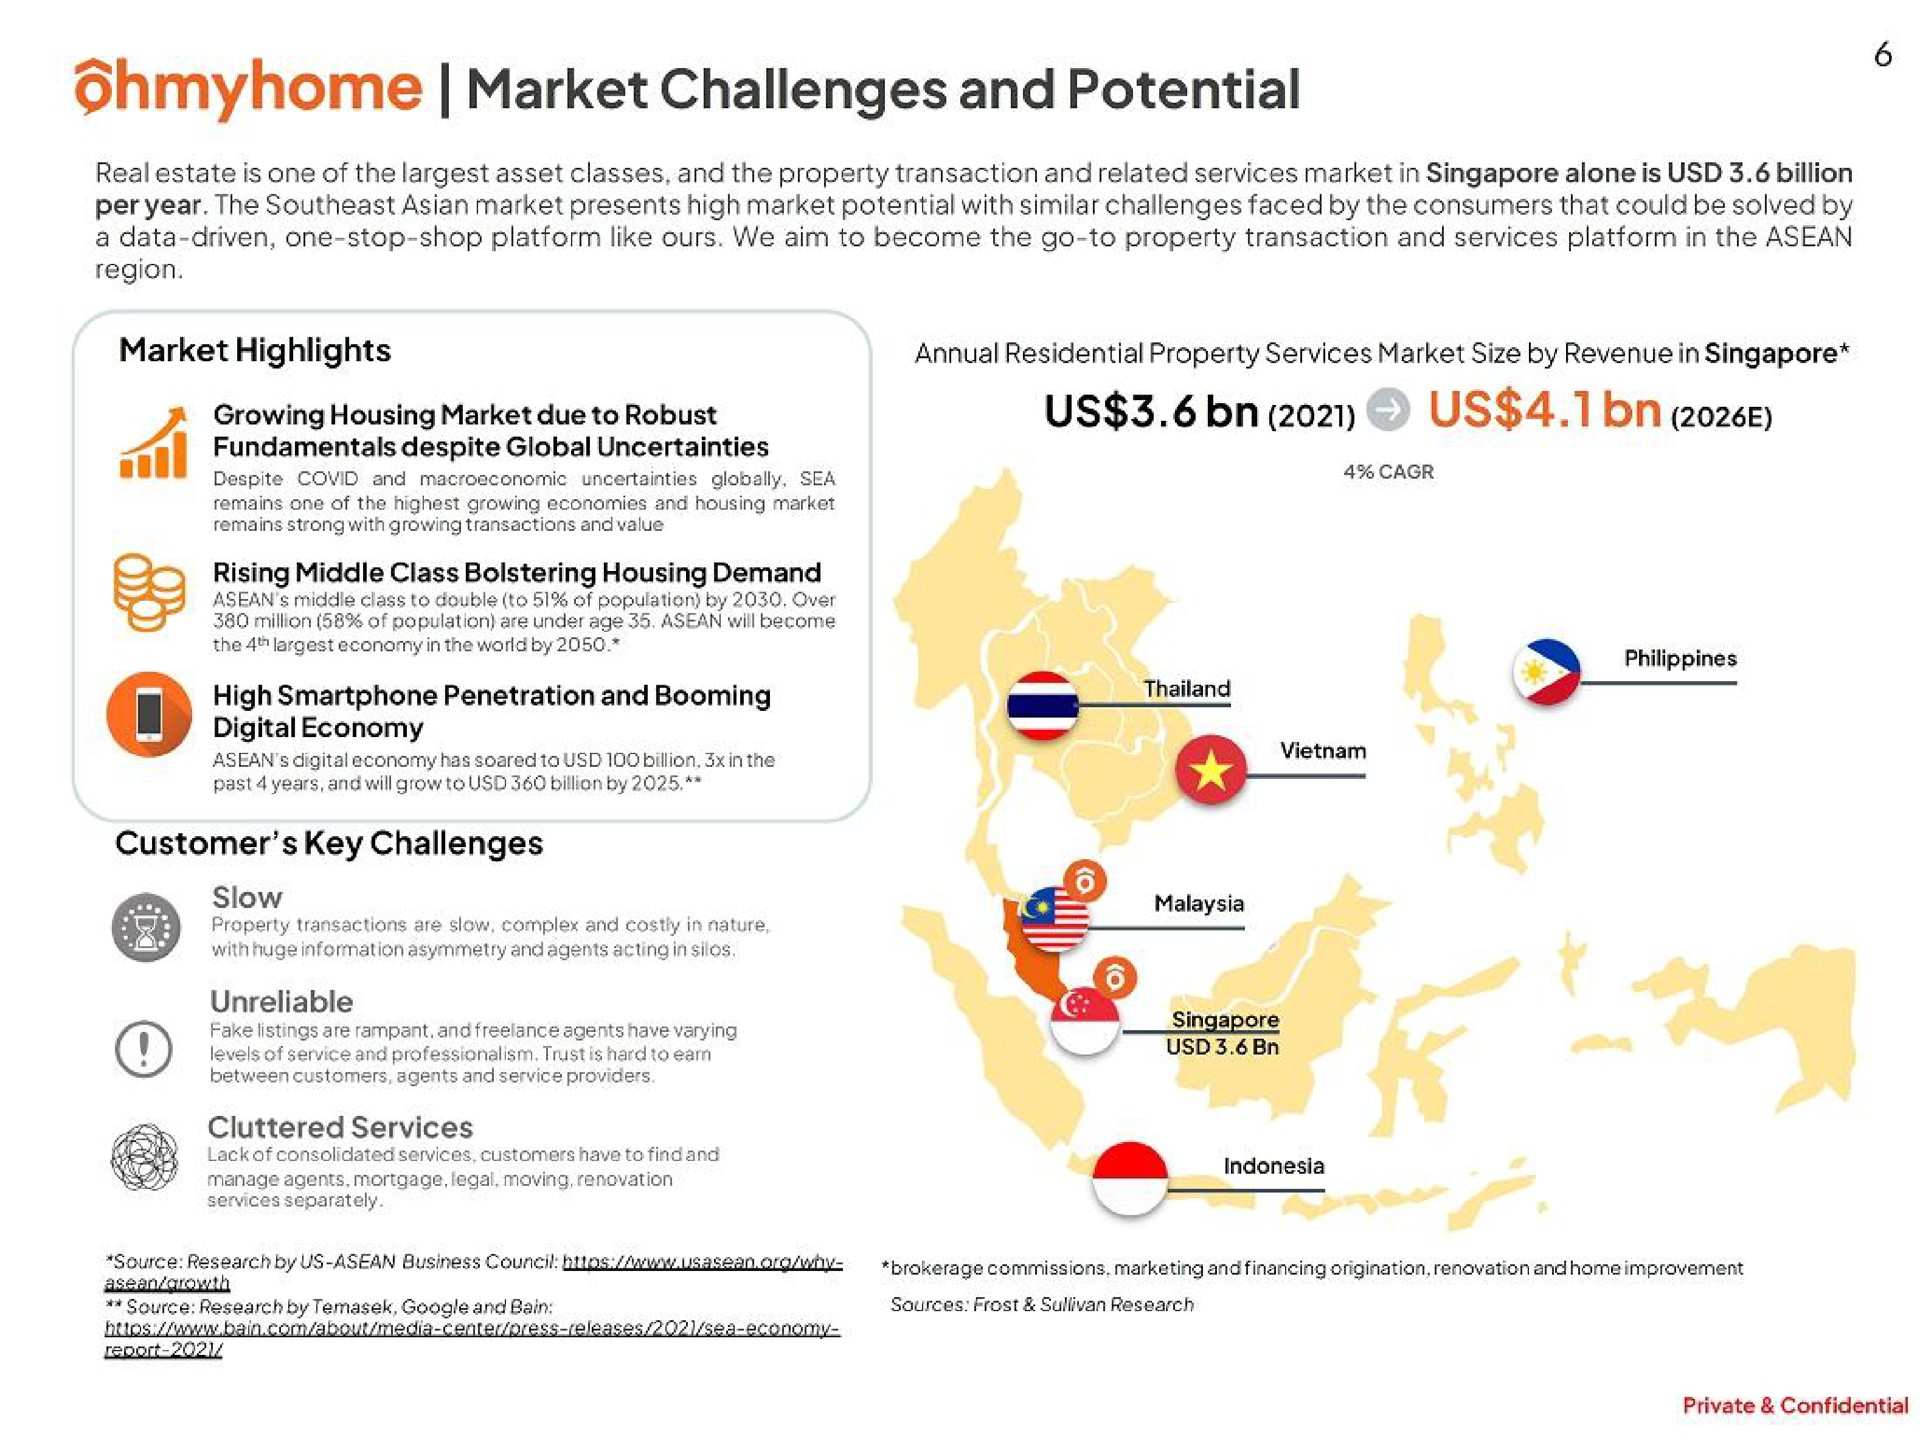 market challenges and potential | Ohmyhome